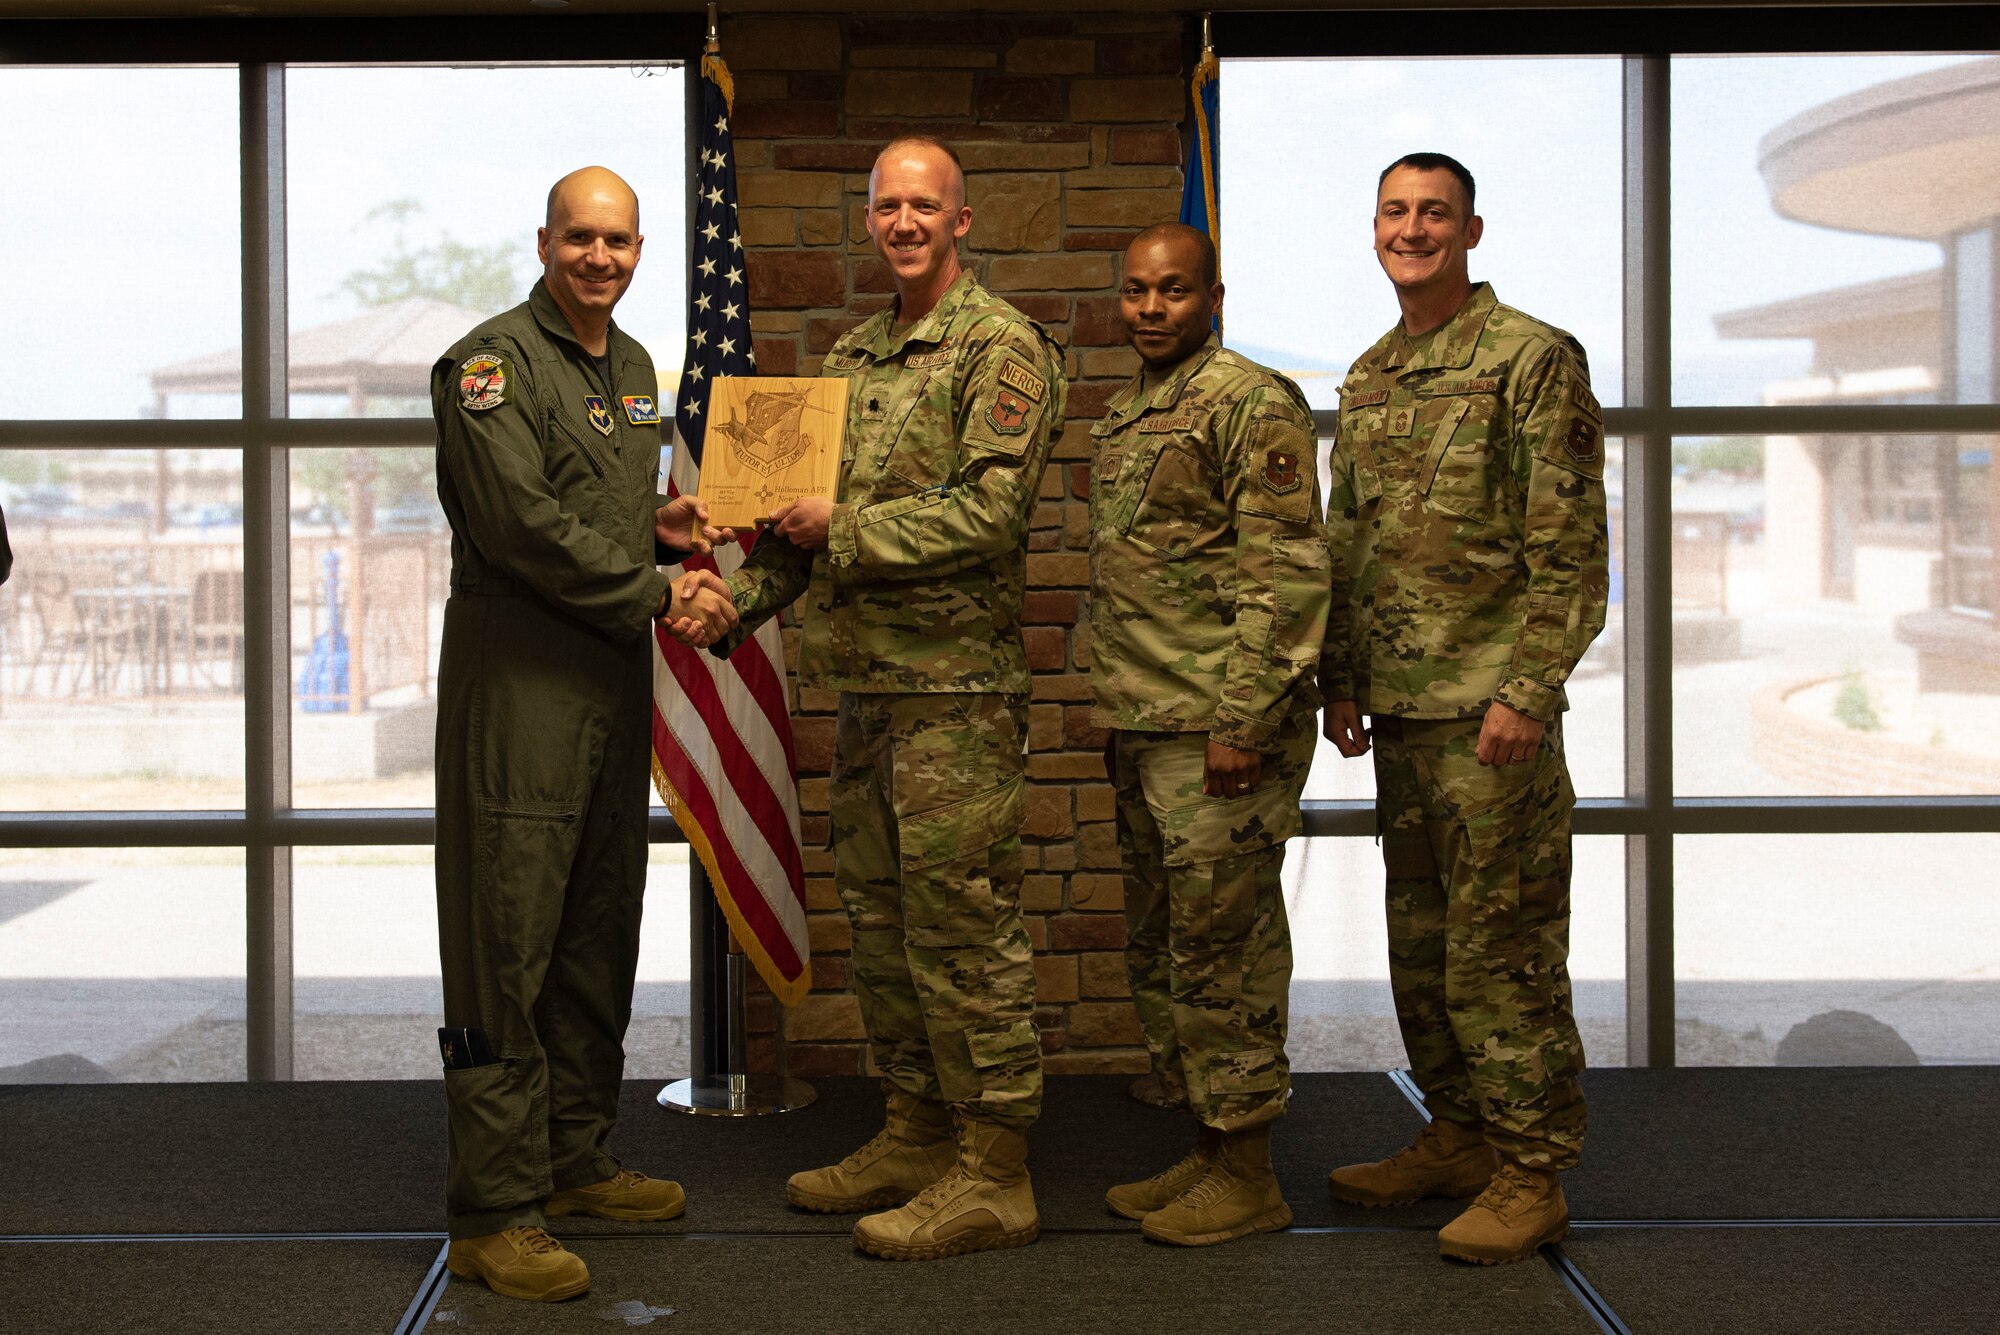 Representatives from 49th Communications Squadron accept the Small Unit of the Quarter Award during the 49th Wing’s 1st quarter awards ceremony, June 10, 2022, on Holloman Air Force Base, New Mexico.